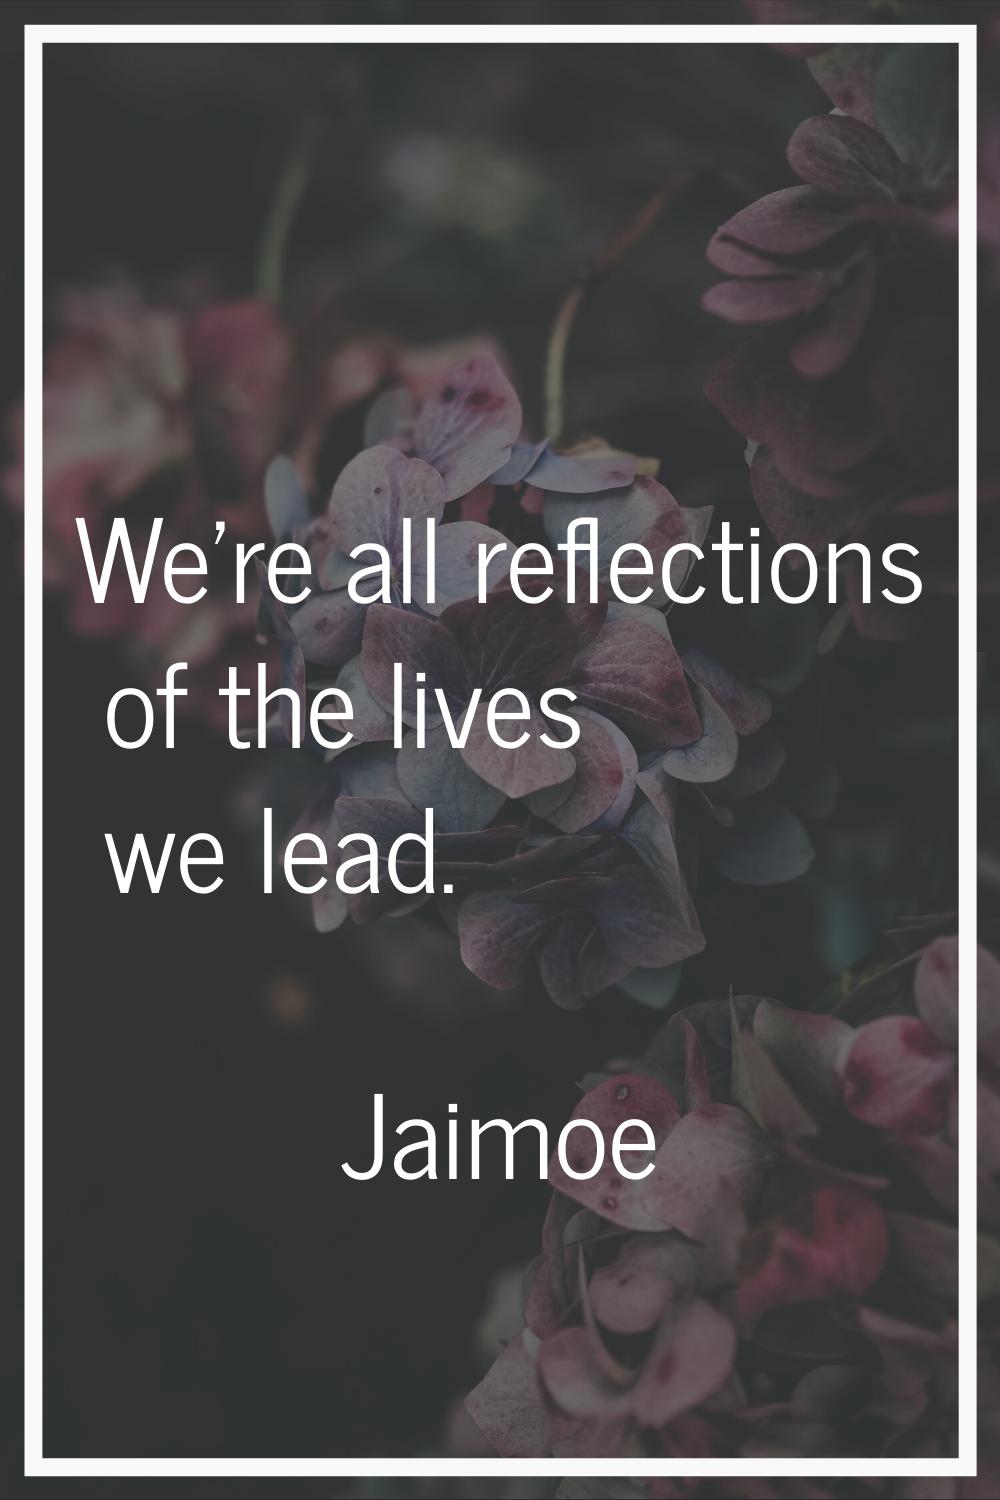 We're all reflections of the lives we lead.